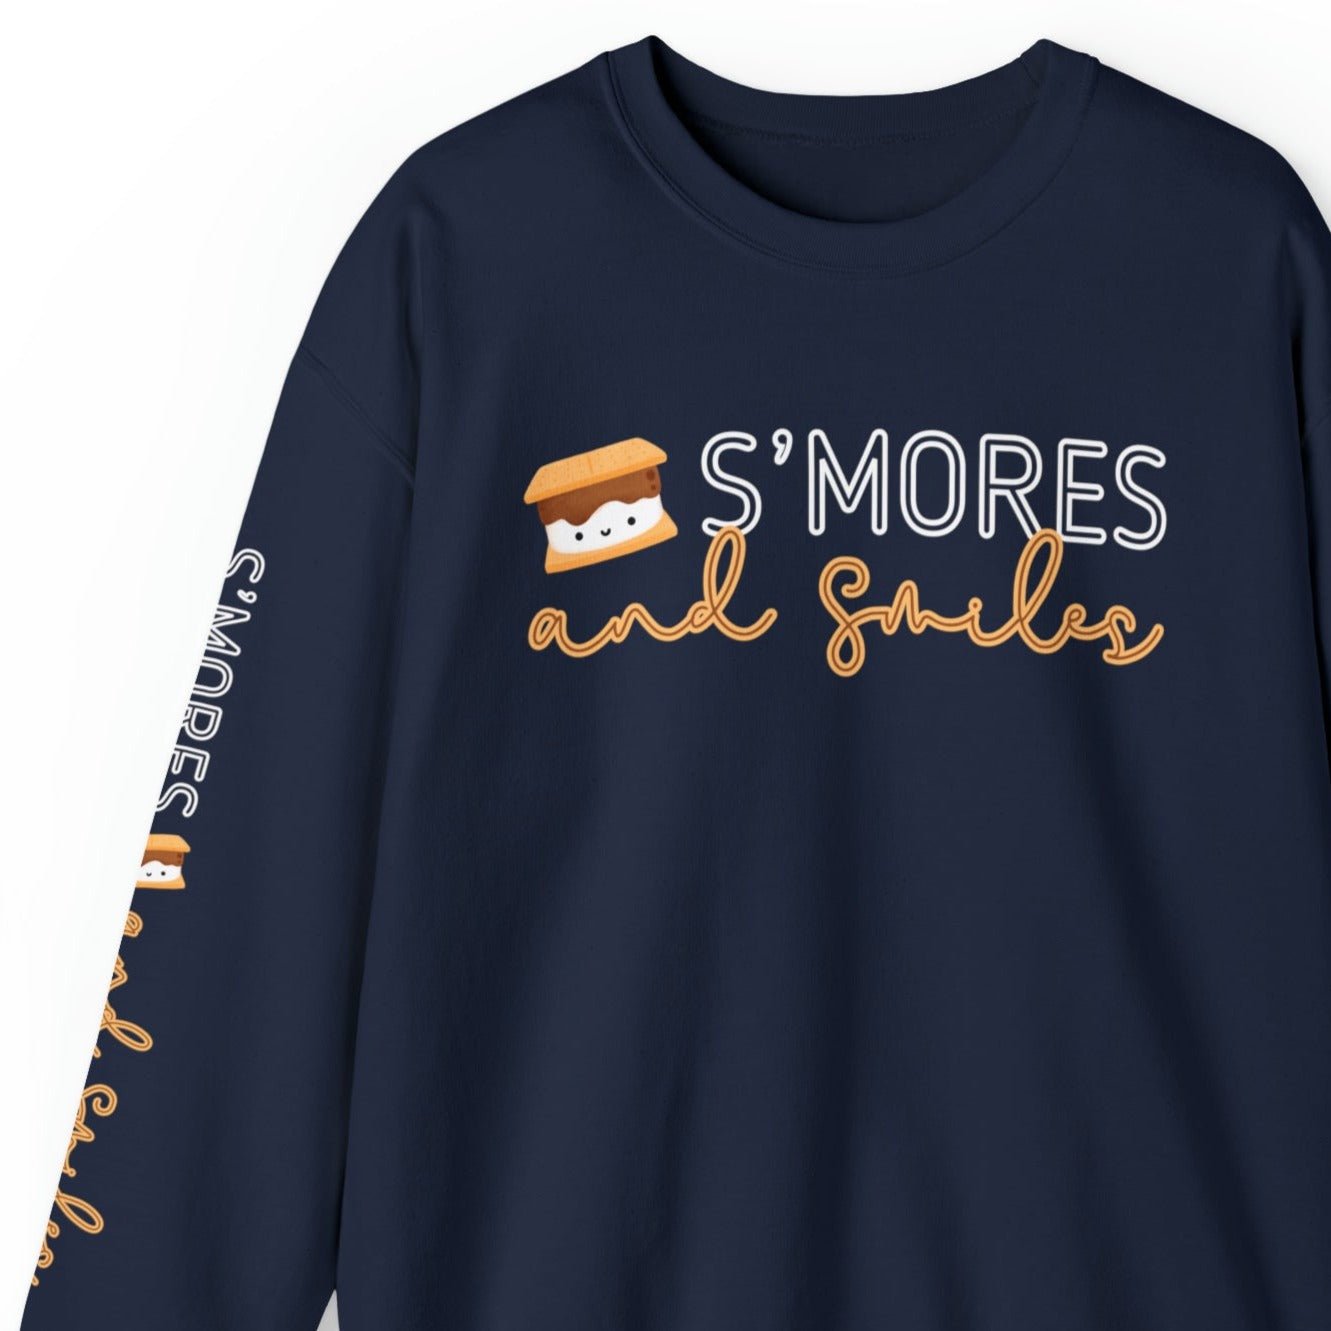 Women's Sweatshirt - 'S'mores and Smiles' with Cute S'more Design and Sleeve Detail - Eddy and Rita